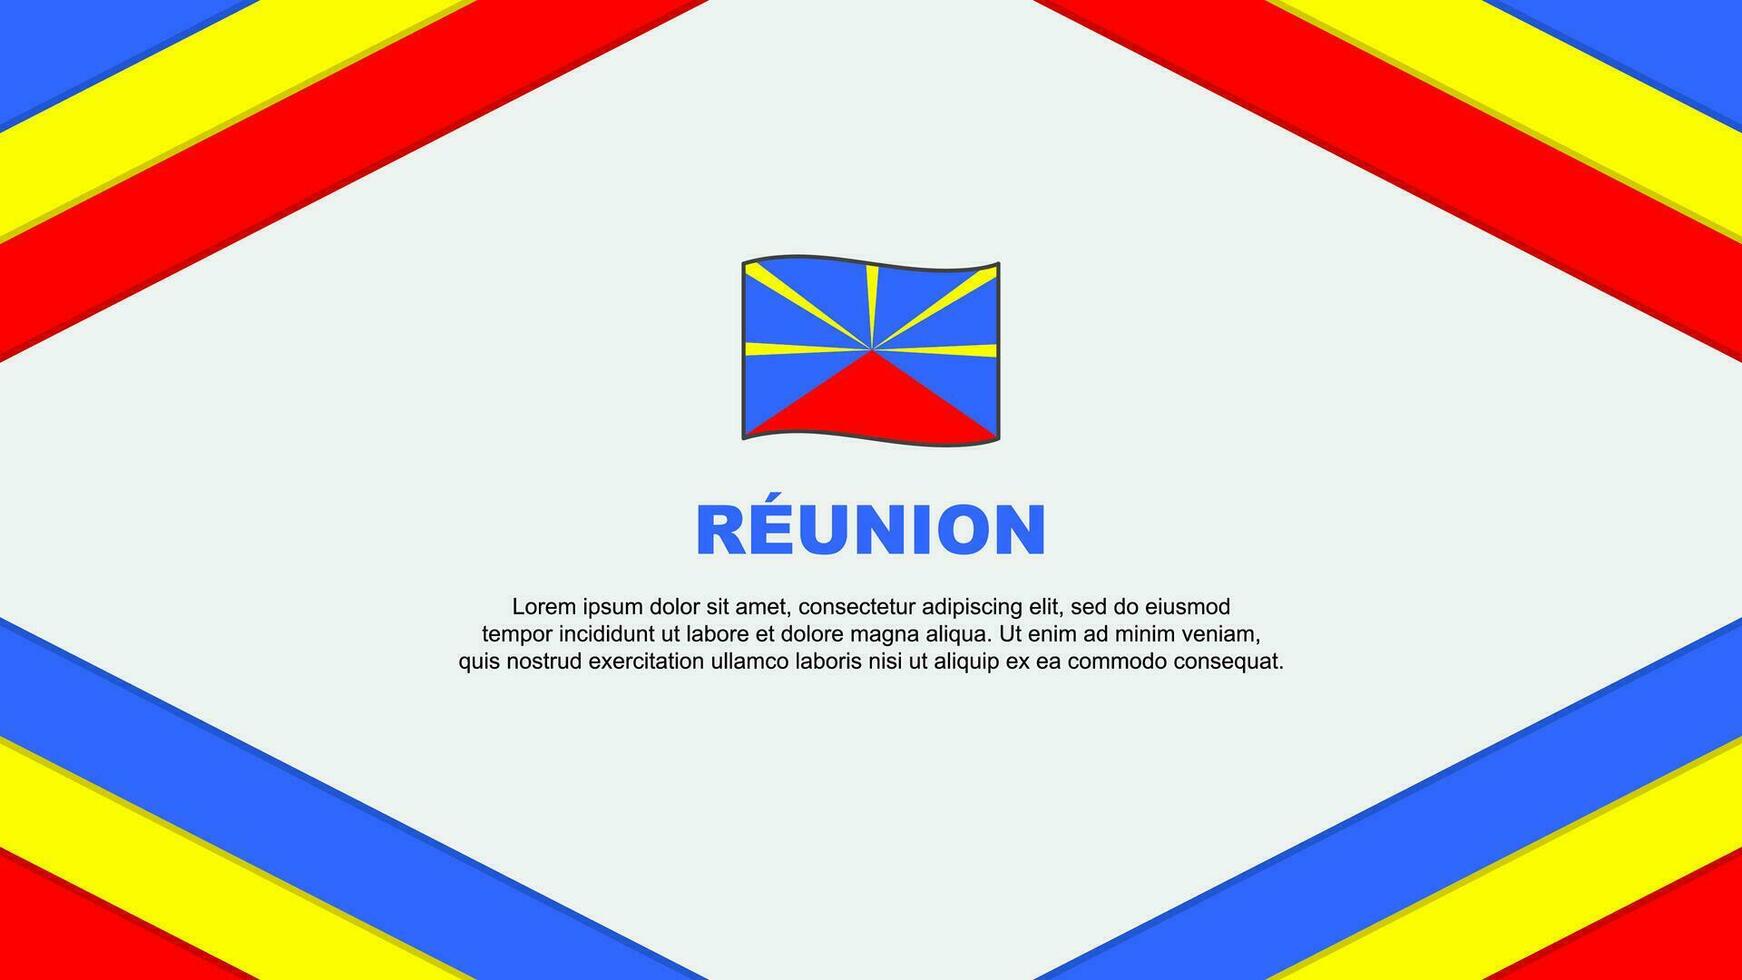 Reunion Flag Abstract Background Design Template. Reunion Independence Day Banner Cartoon Vector Illustration. Template